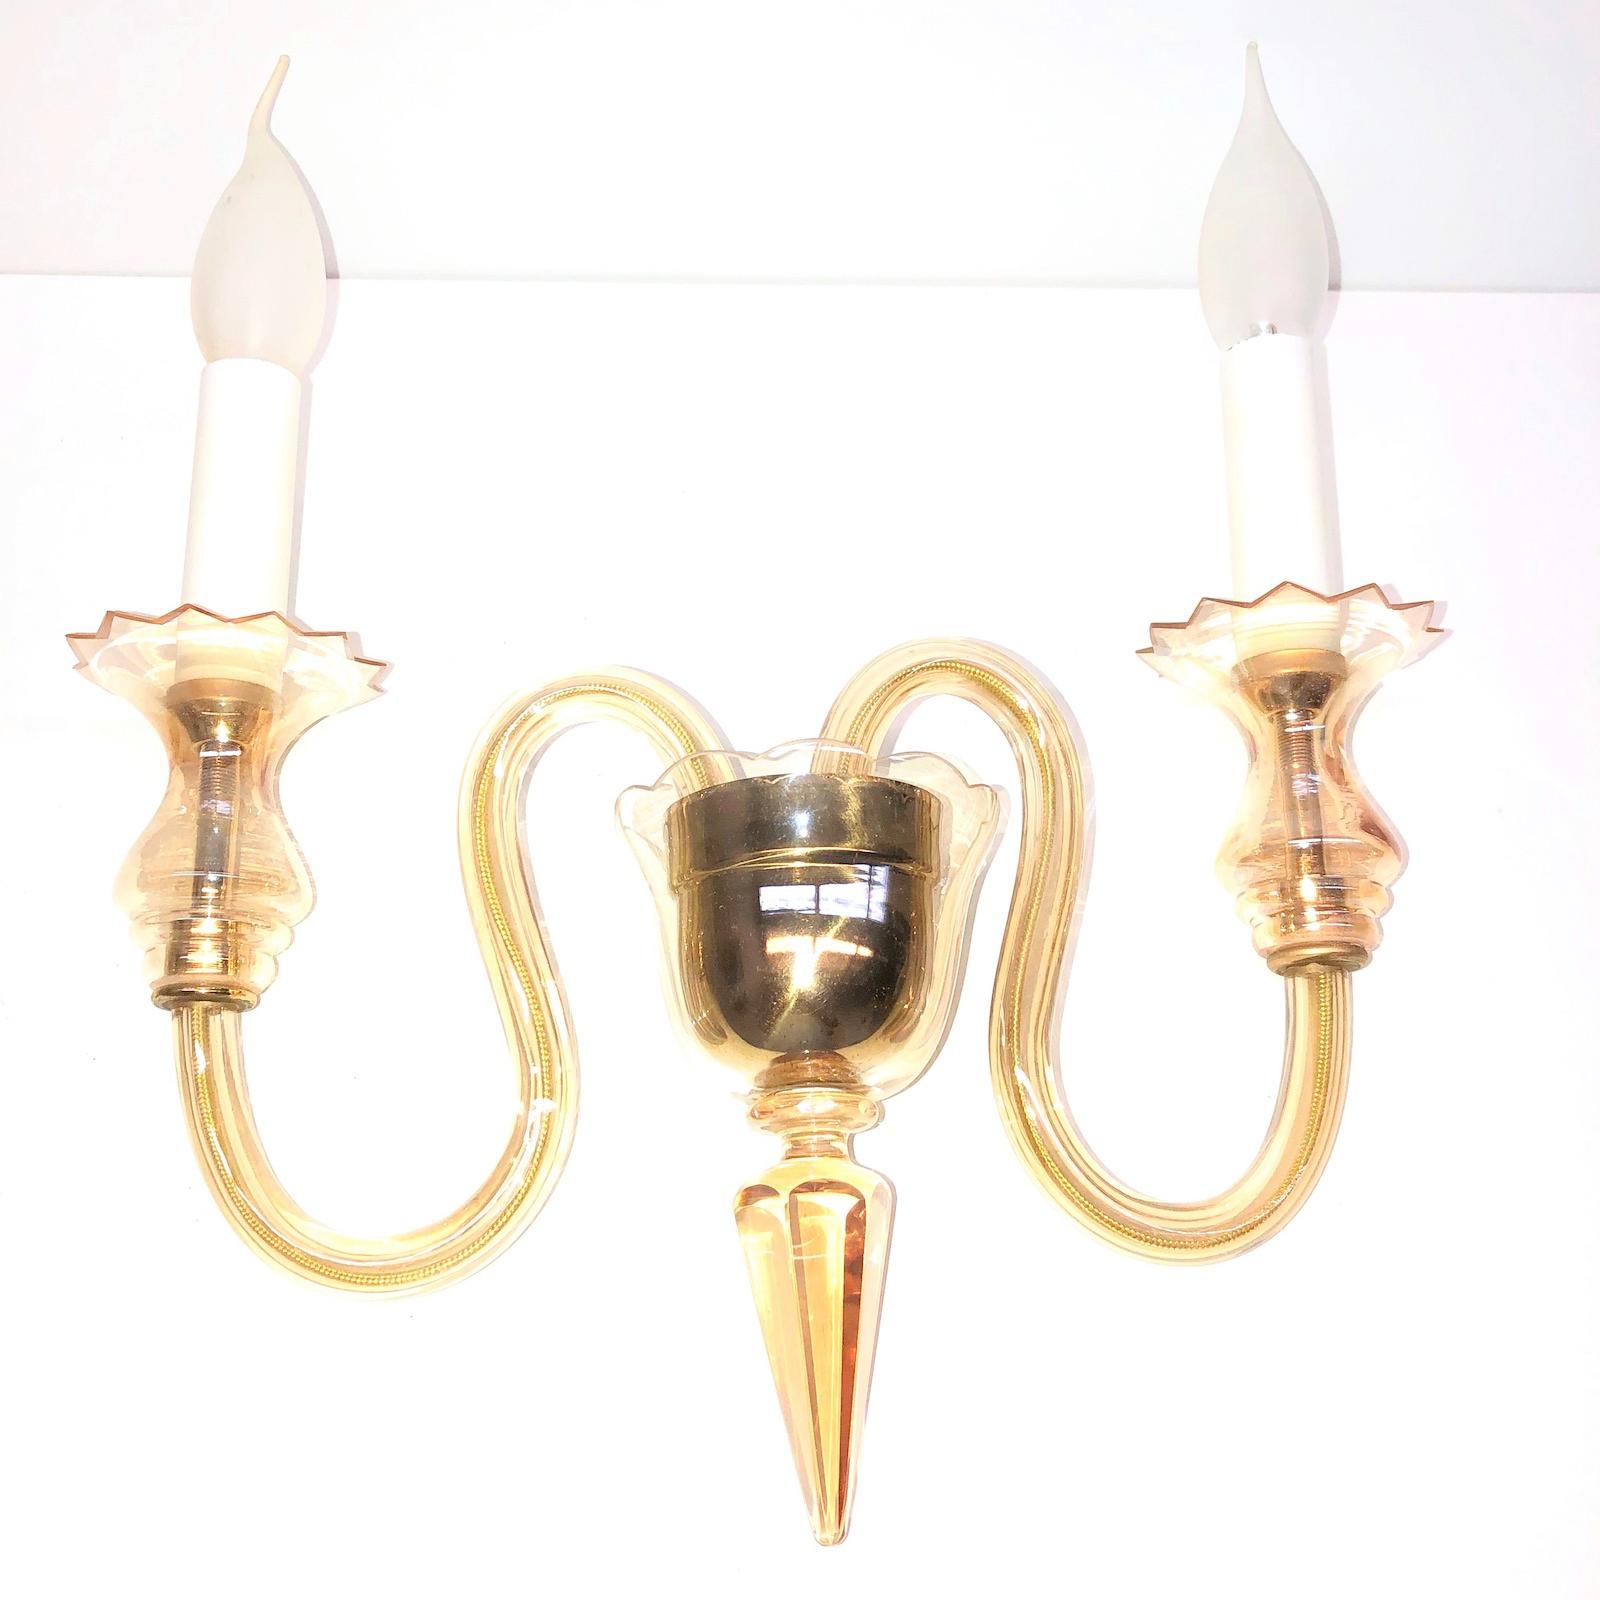 Petite Murano Glass Sconce Wall Lamp Vintage, Italy, 1960s For Sale 2